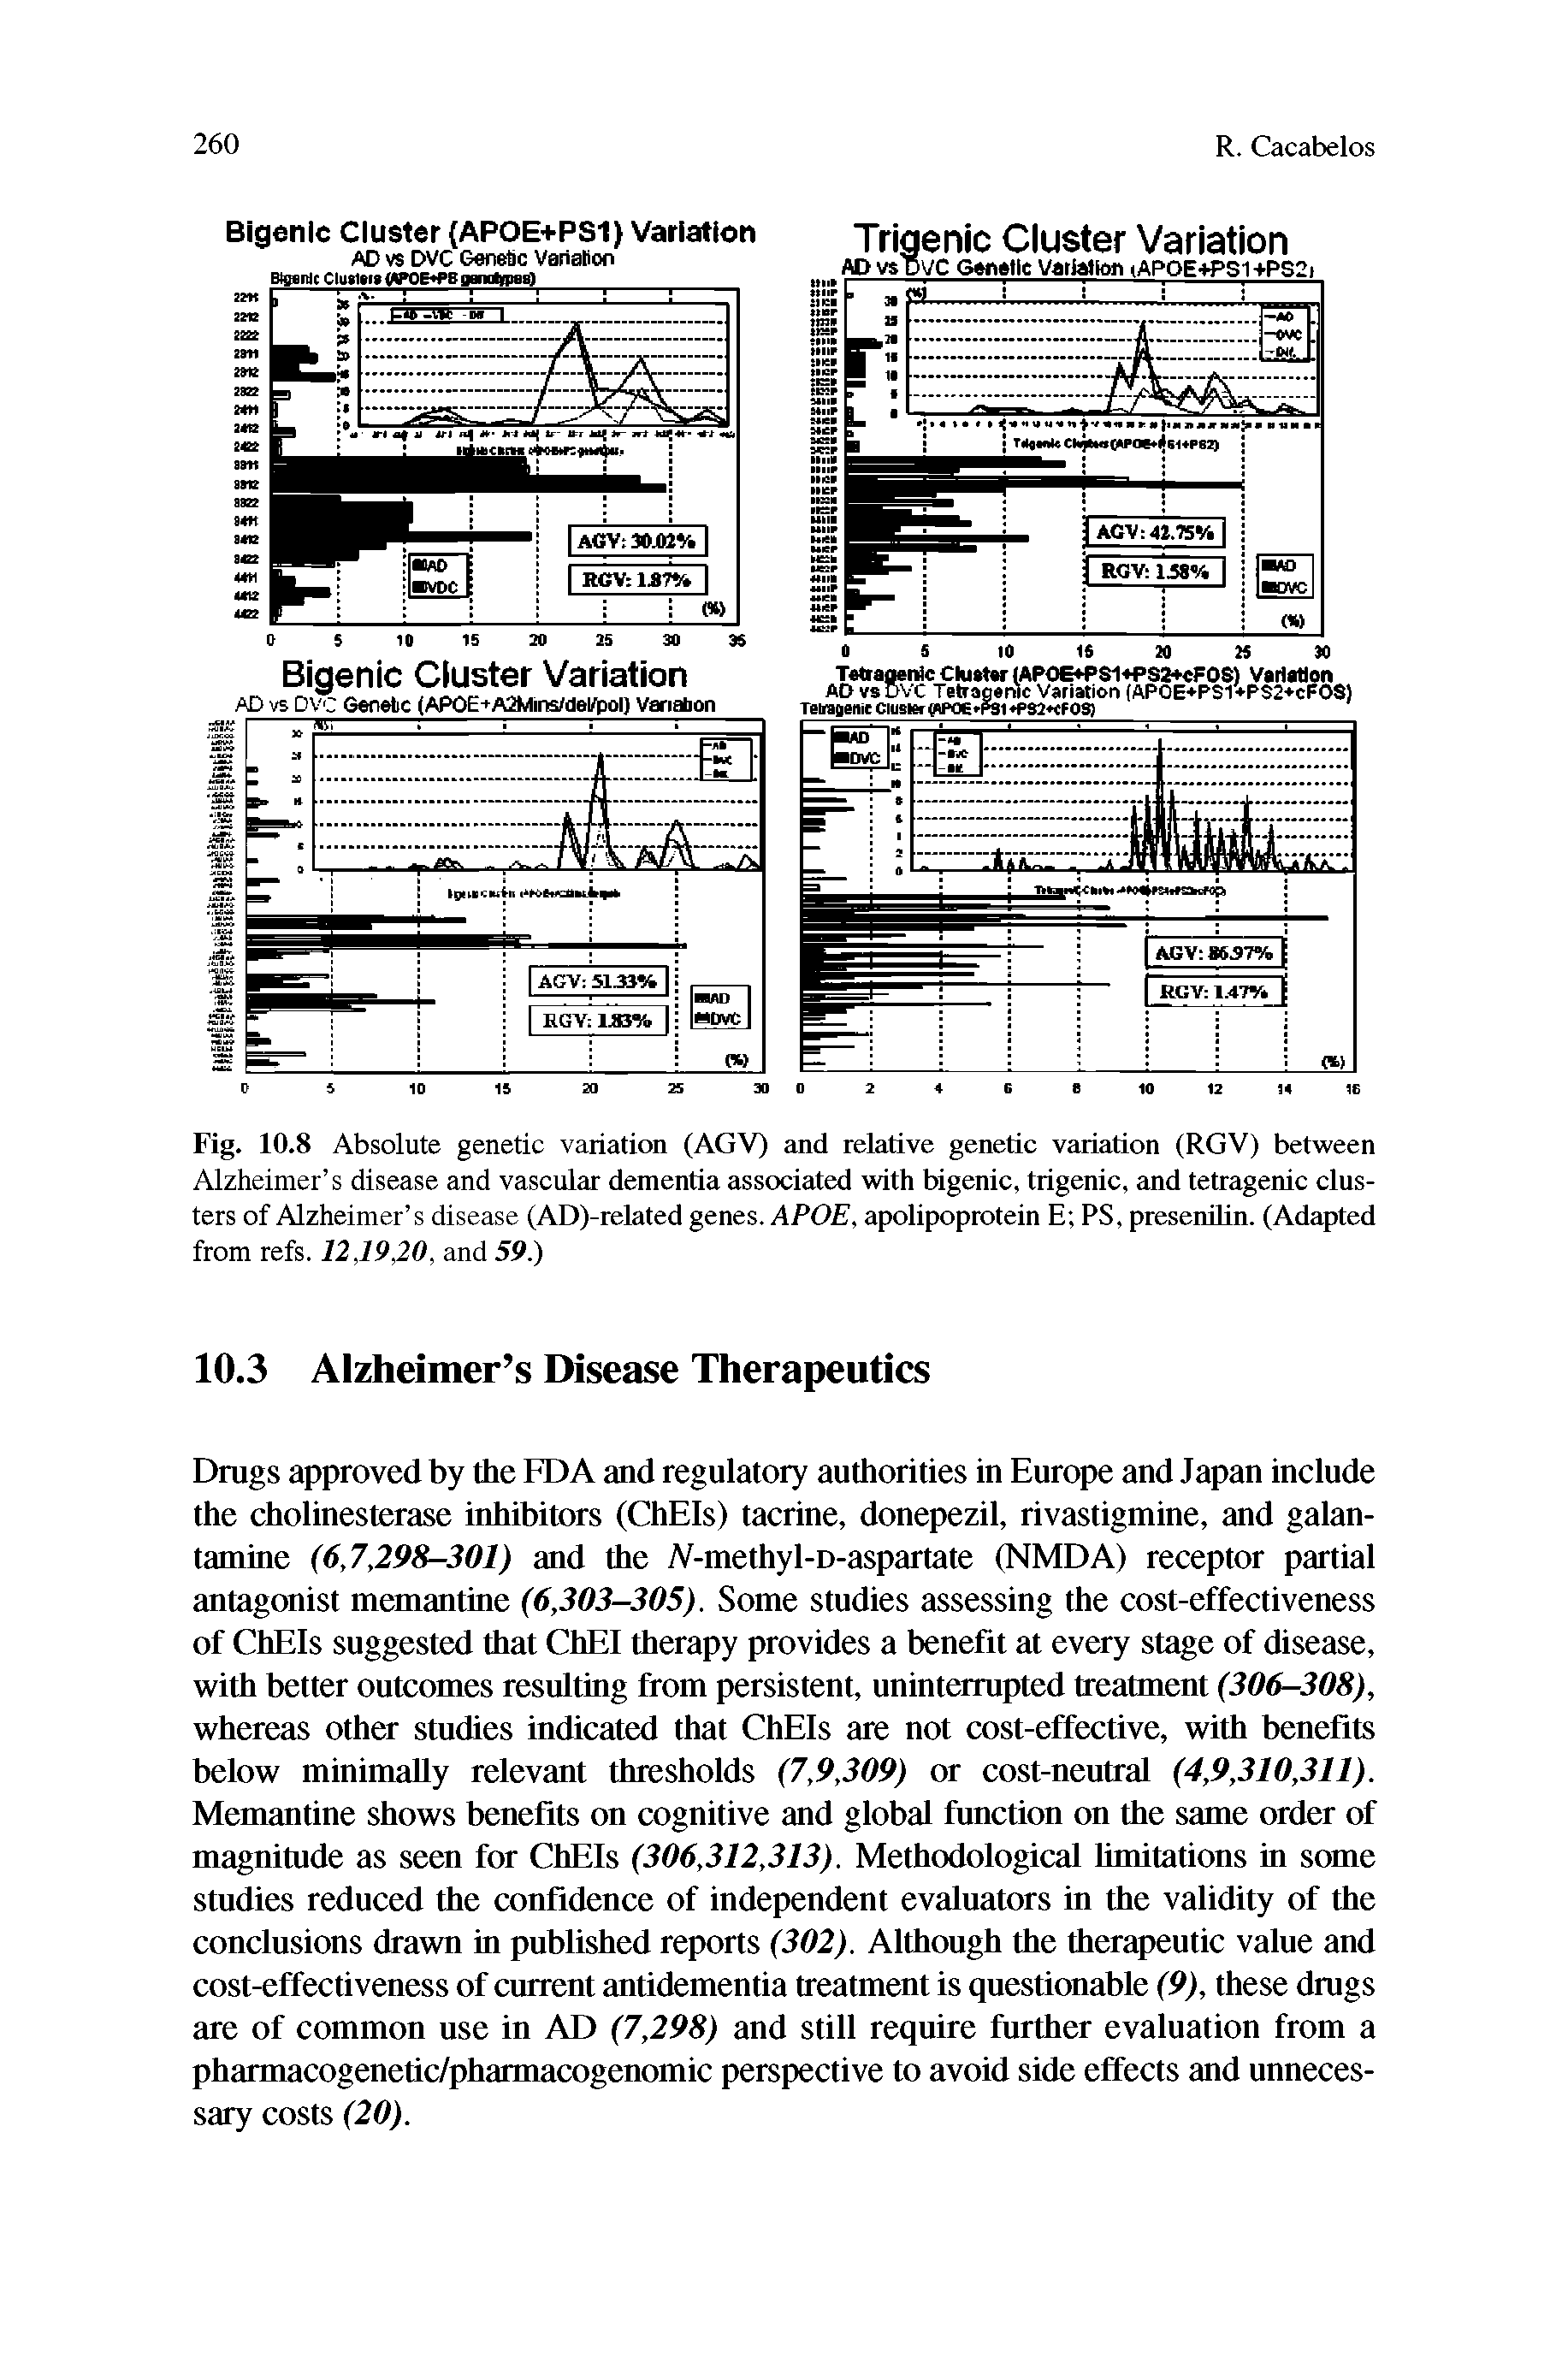 Fig. 10.8 Absolute genetic variation (AGV) and relative genetic variation (RGV) between Alzheimer s disease and vascular dementia associated with bigenic, trigenic, and tetragenic clusters of Alzheimer s disease (AD)-related genes. APOE, apolipoprotein E PS, presenilin. (Adapted from refs. 12,19,20, and 59.)...